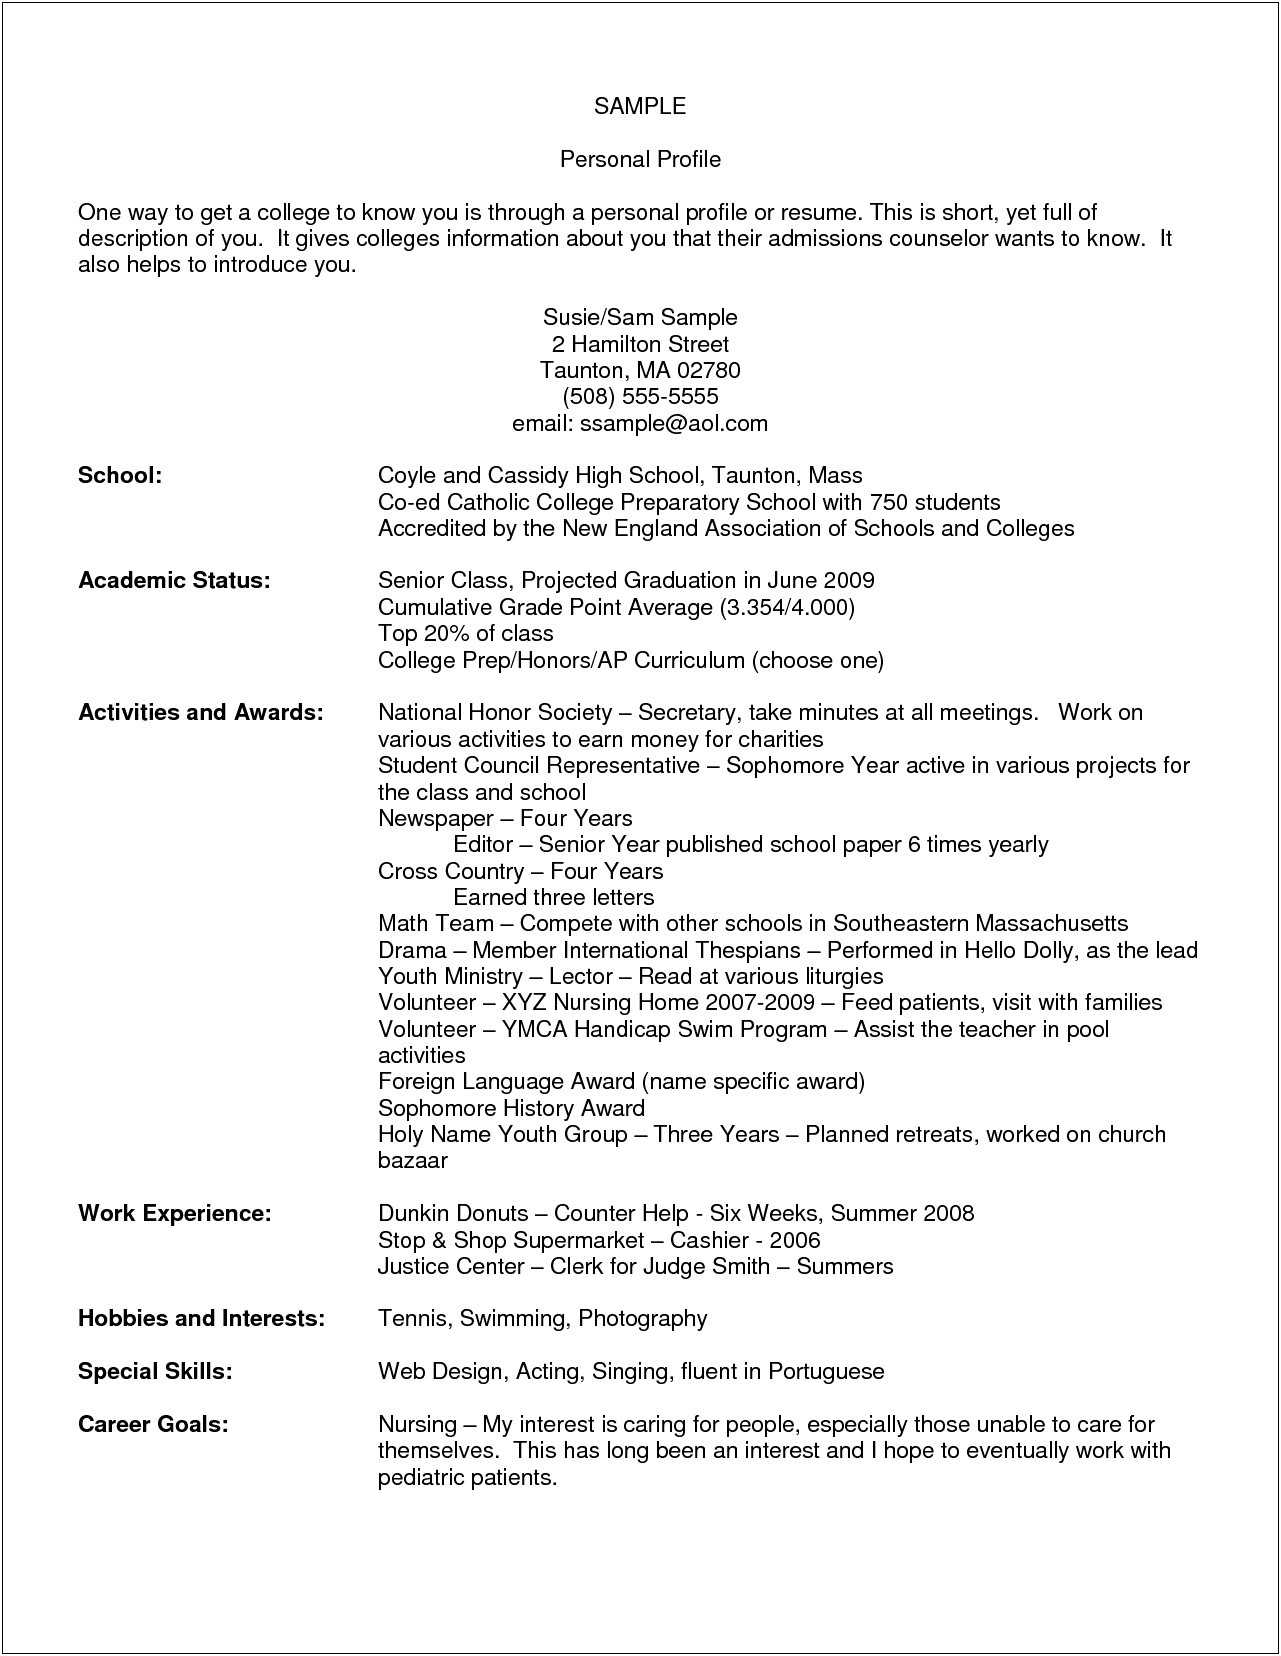 Resume Objective For Convenience Store